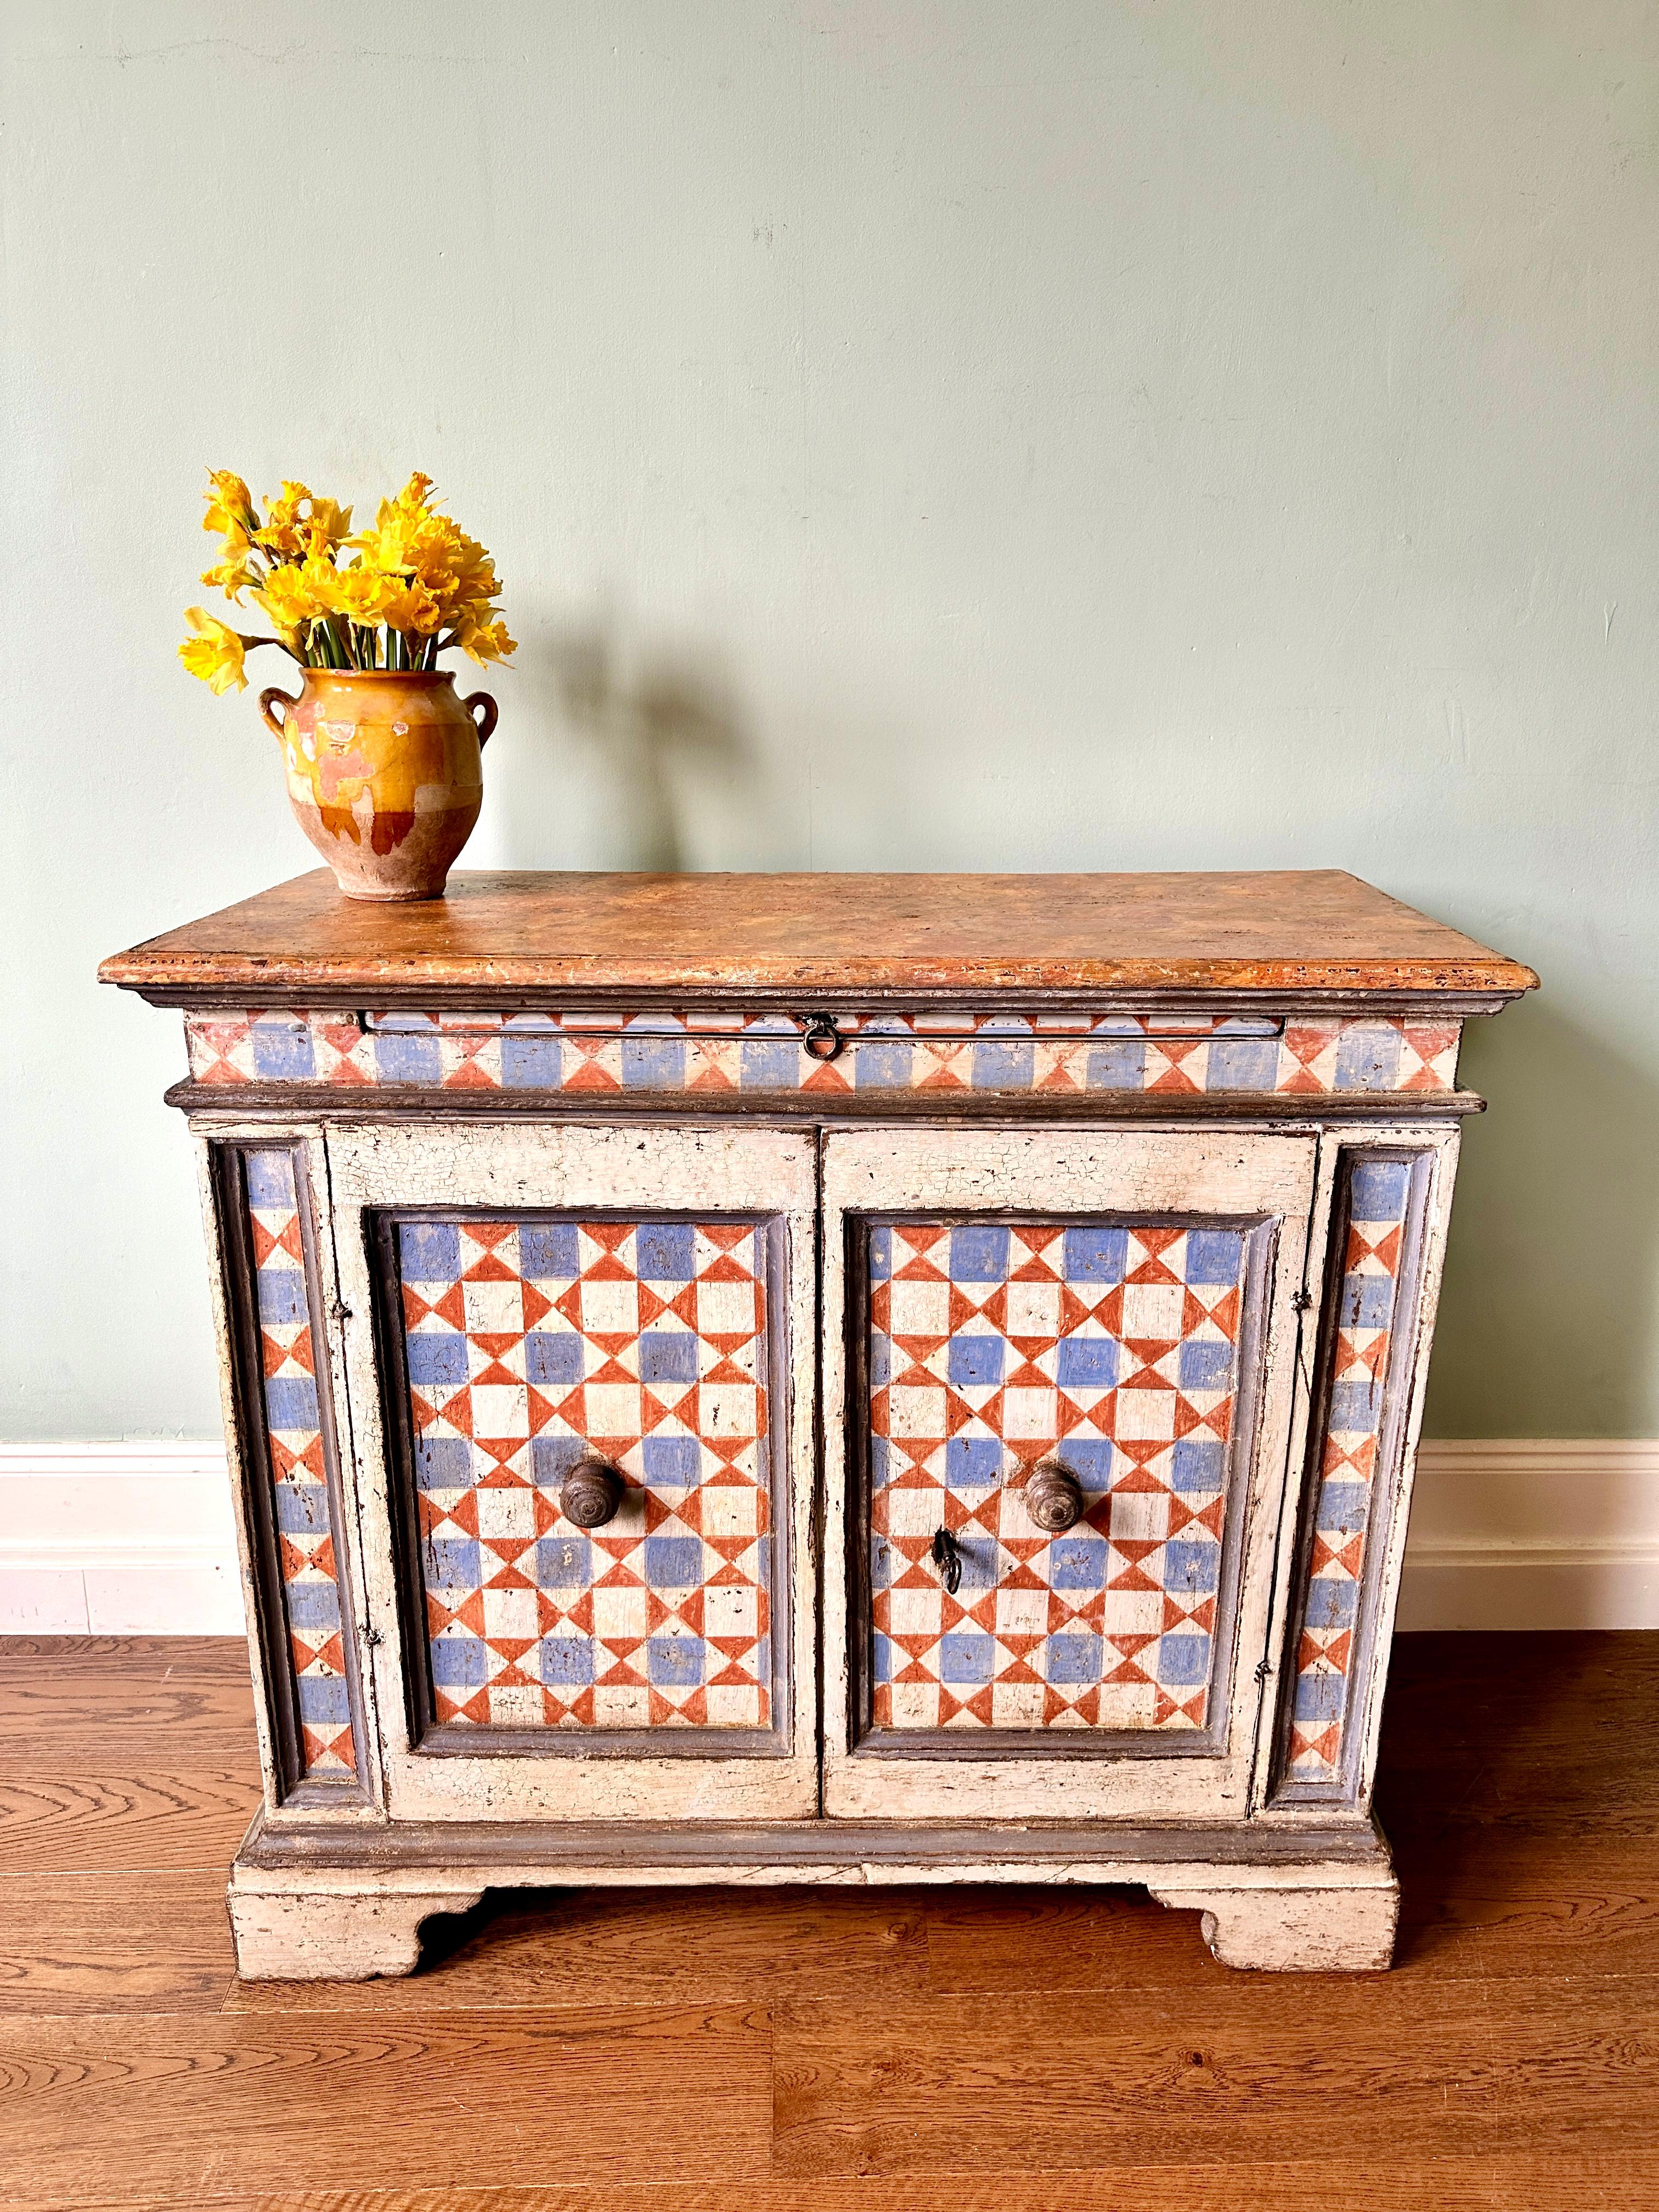 Early C19th Italian painted credenza.

Exceptional geometric hand-painted pine sideboard with cupboard storage and extendable shelf. In very good condition with original lock, key and door hook. Wonderful and desirable wear consistent with age and